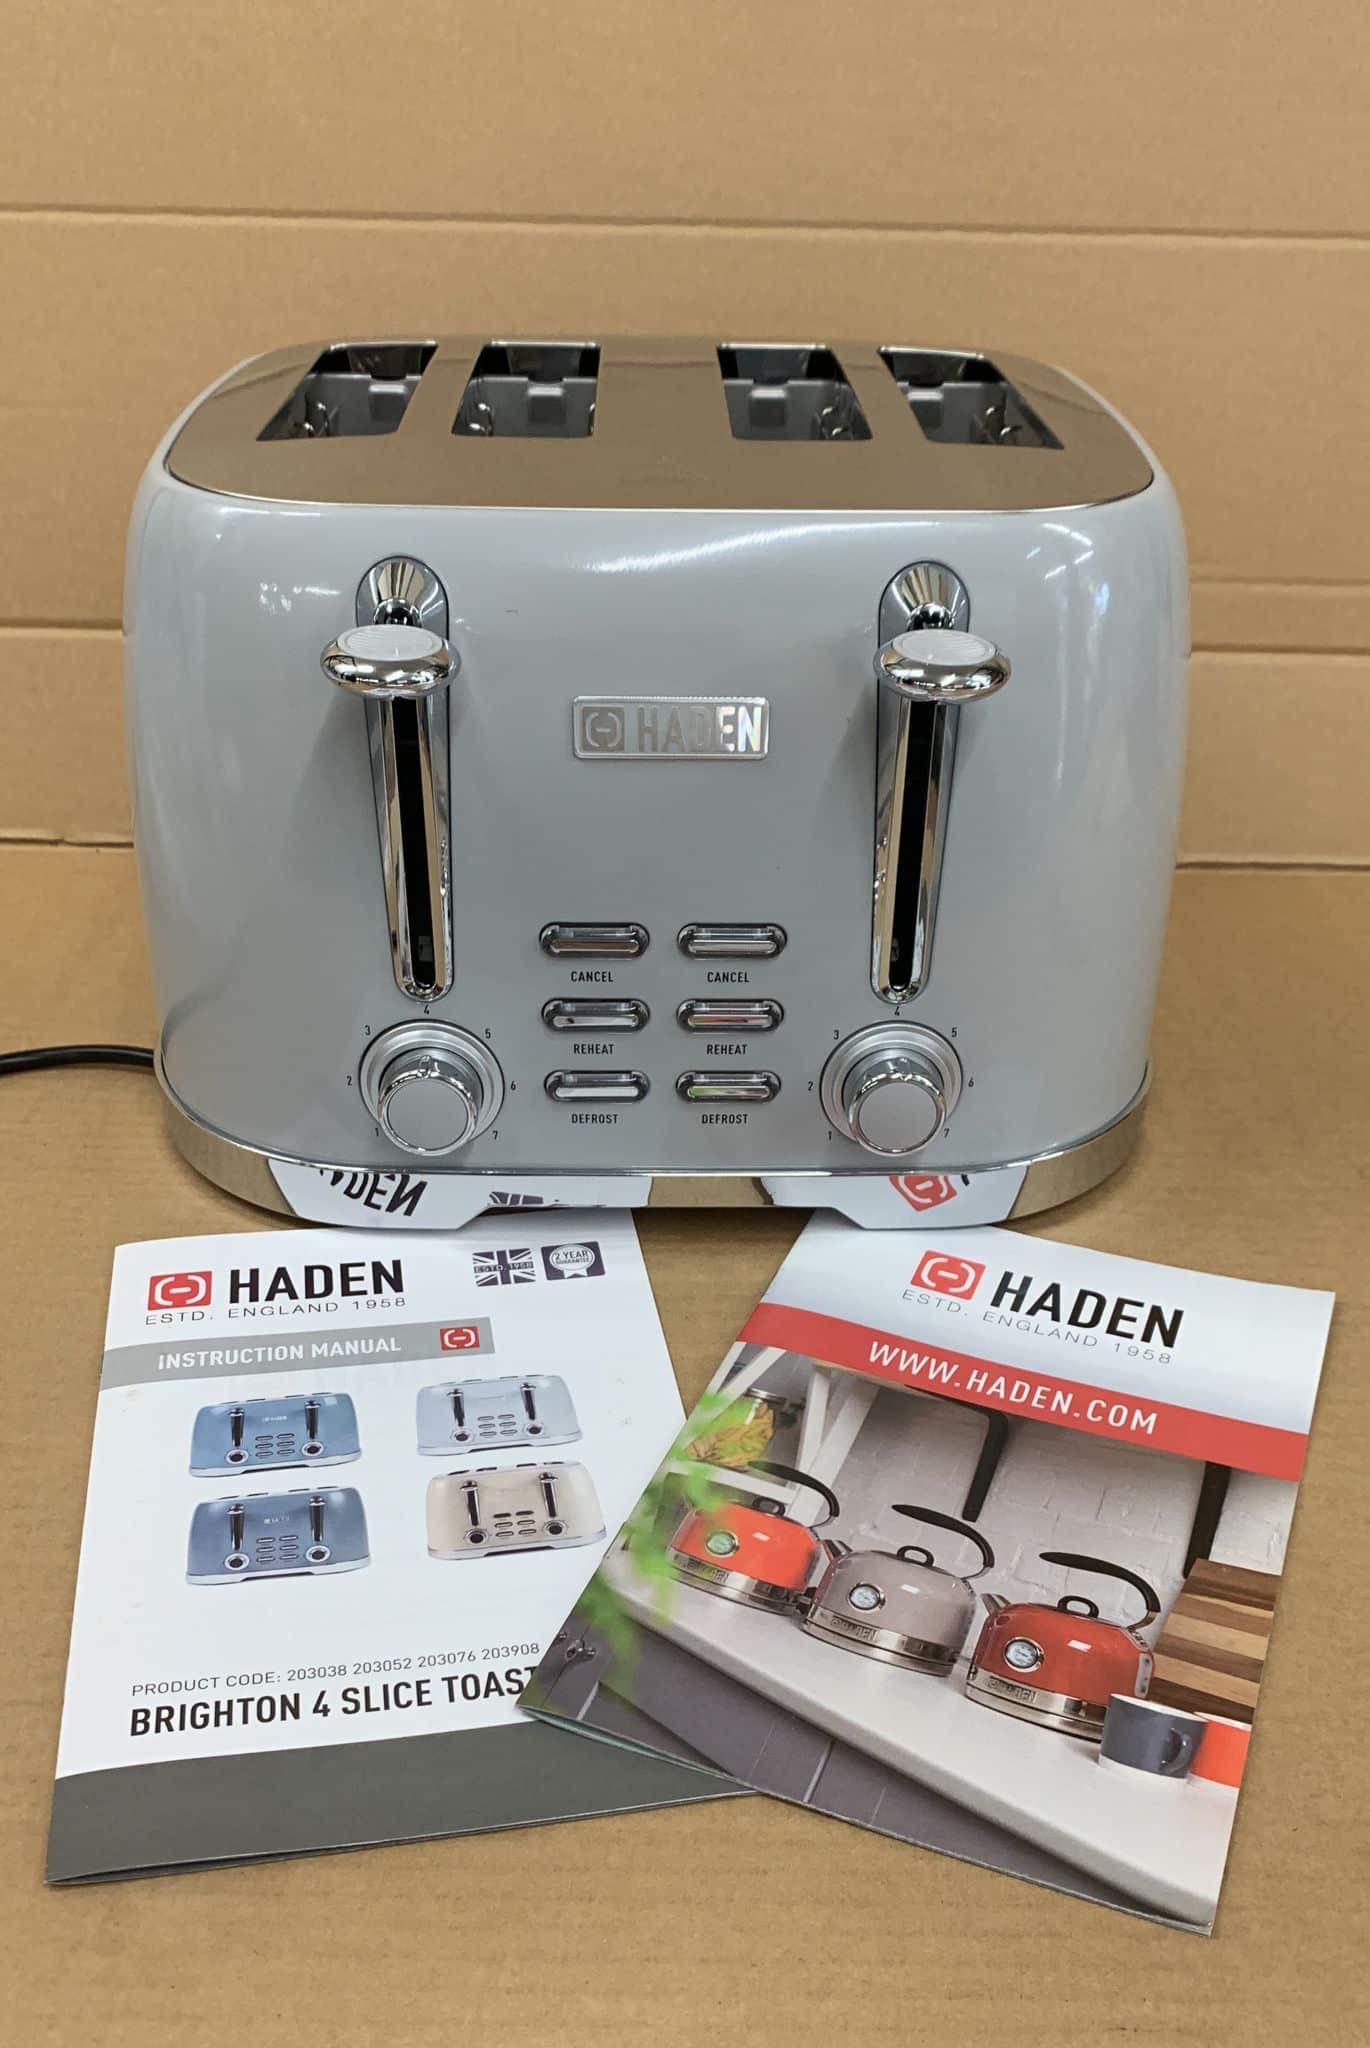 Haden Brighton Ash Grey Toaster - 4 Slice Electric Stainless-Steel Toaster with Reheat and Defrost Functions 3076 (Copy)